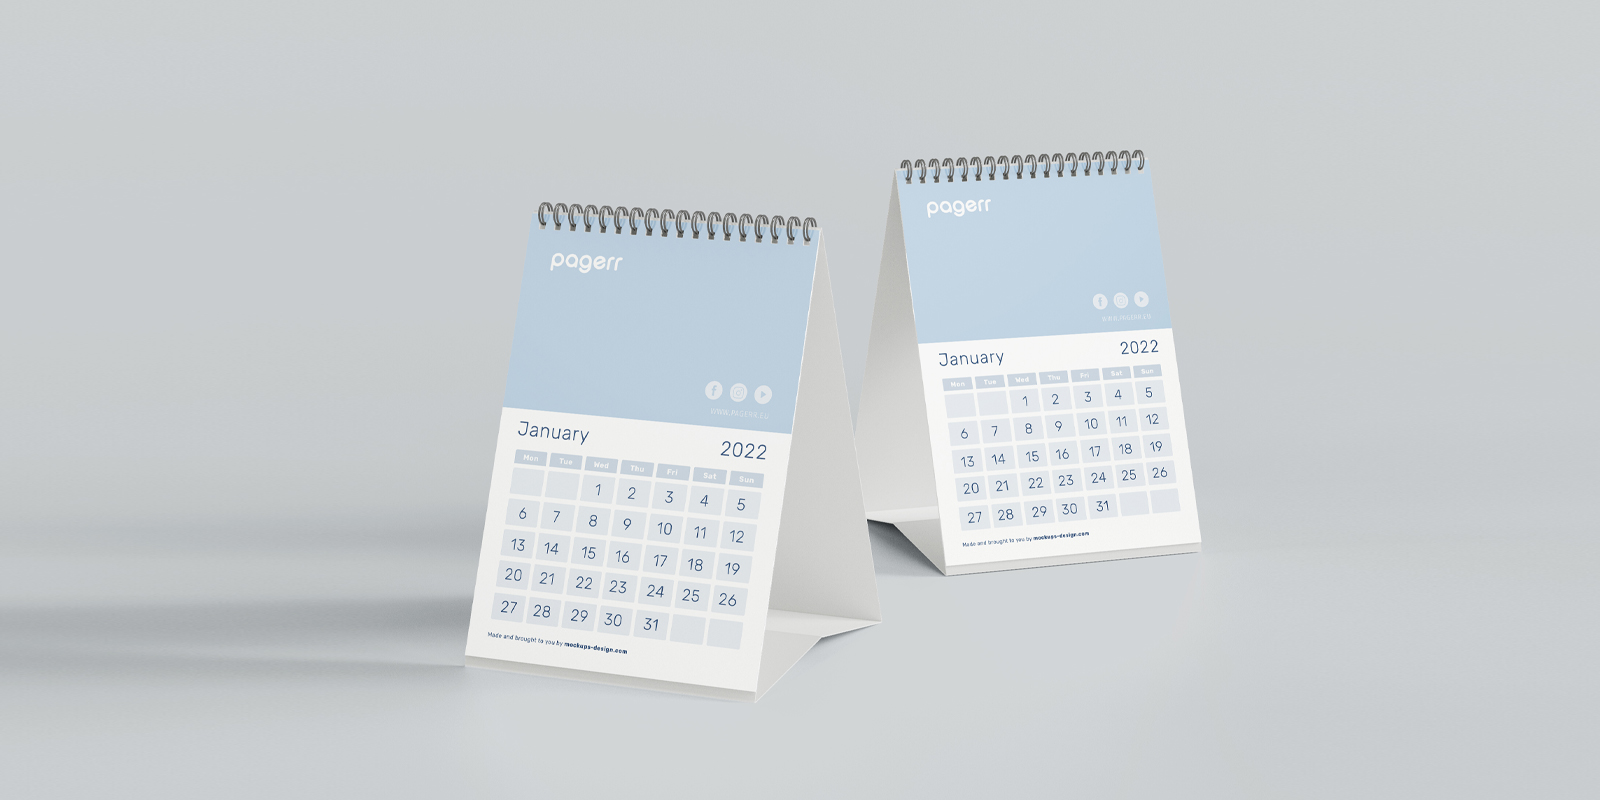 Desk calendars in Perth - Print with Pagerr